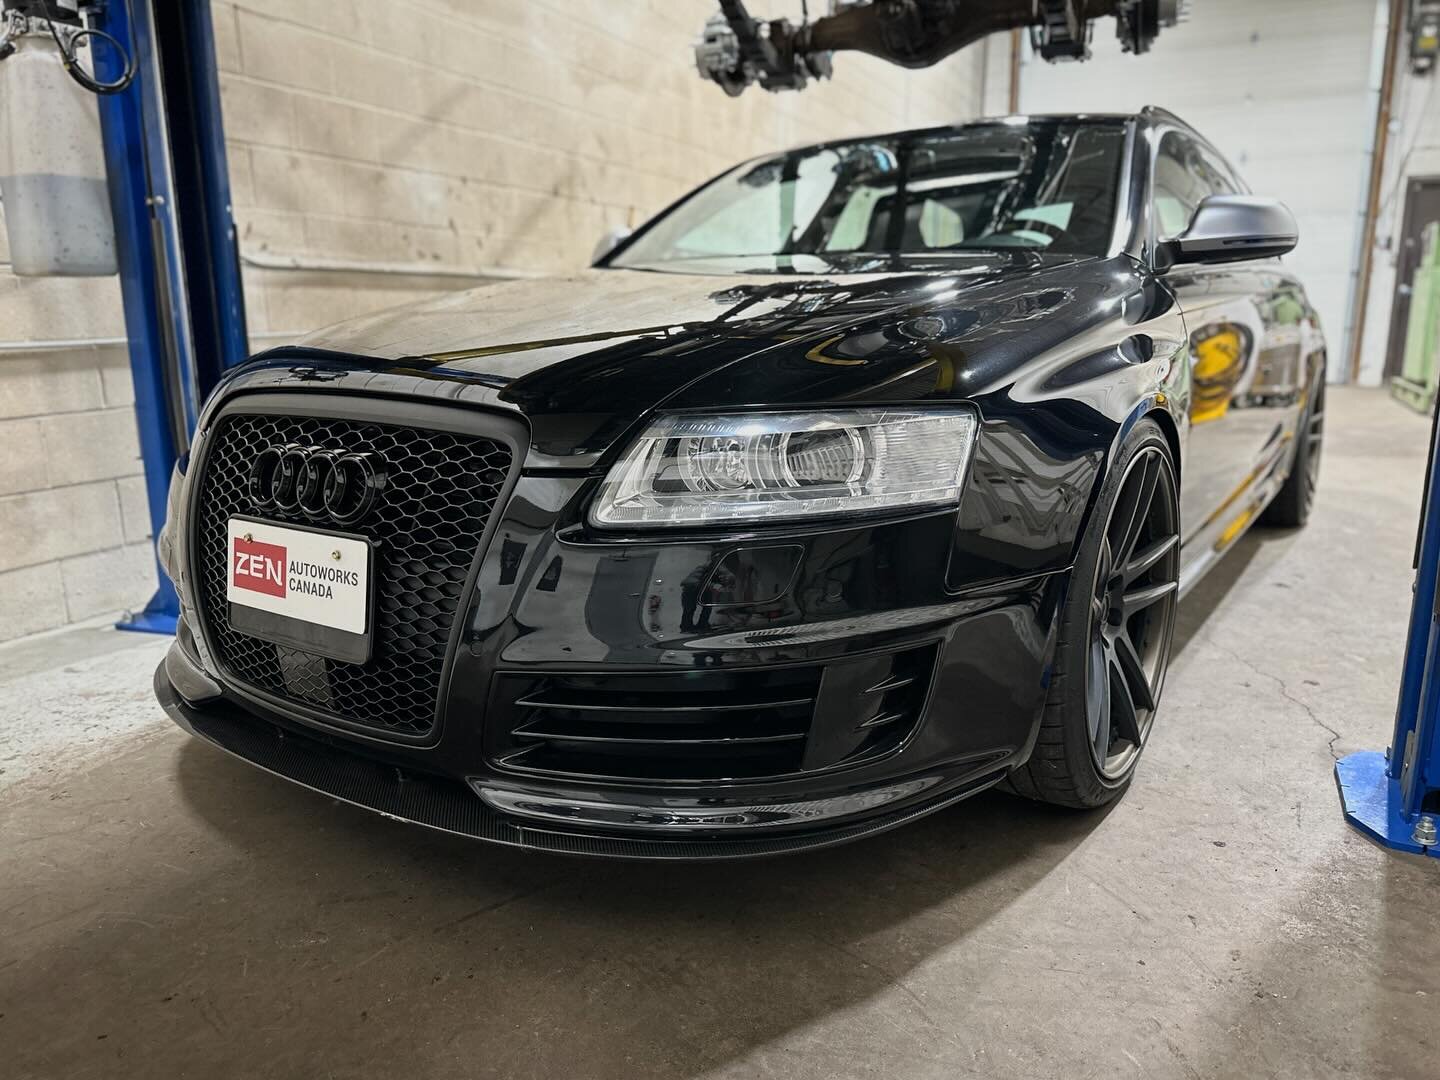 Potentially 811hp? Or more? TBD
This C6 RS6 Biturbo V10 bought out of JDM auctions for a client in Calgary appears to have benefited from MTM&rsquo;s full kit right down to the exhaust. We look forward to seeing this wagon on the streets this summer 